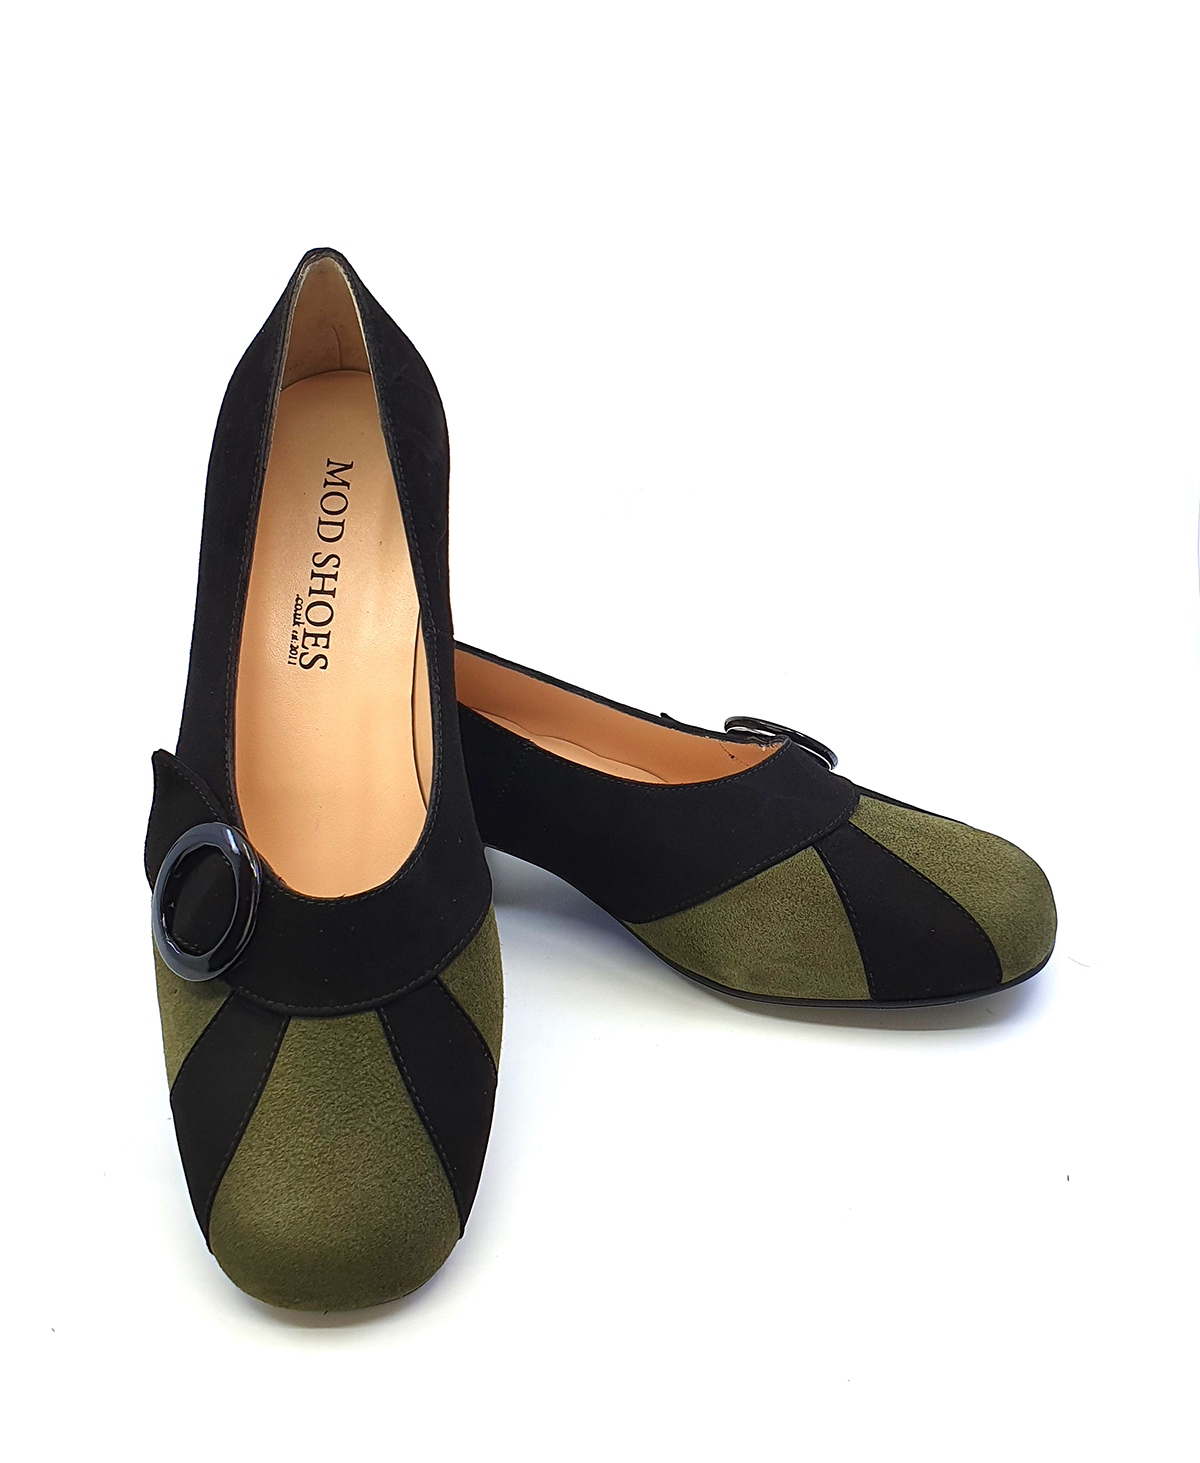 green suede shoes ladies